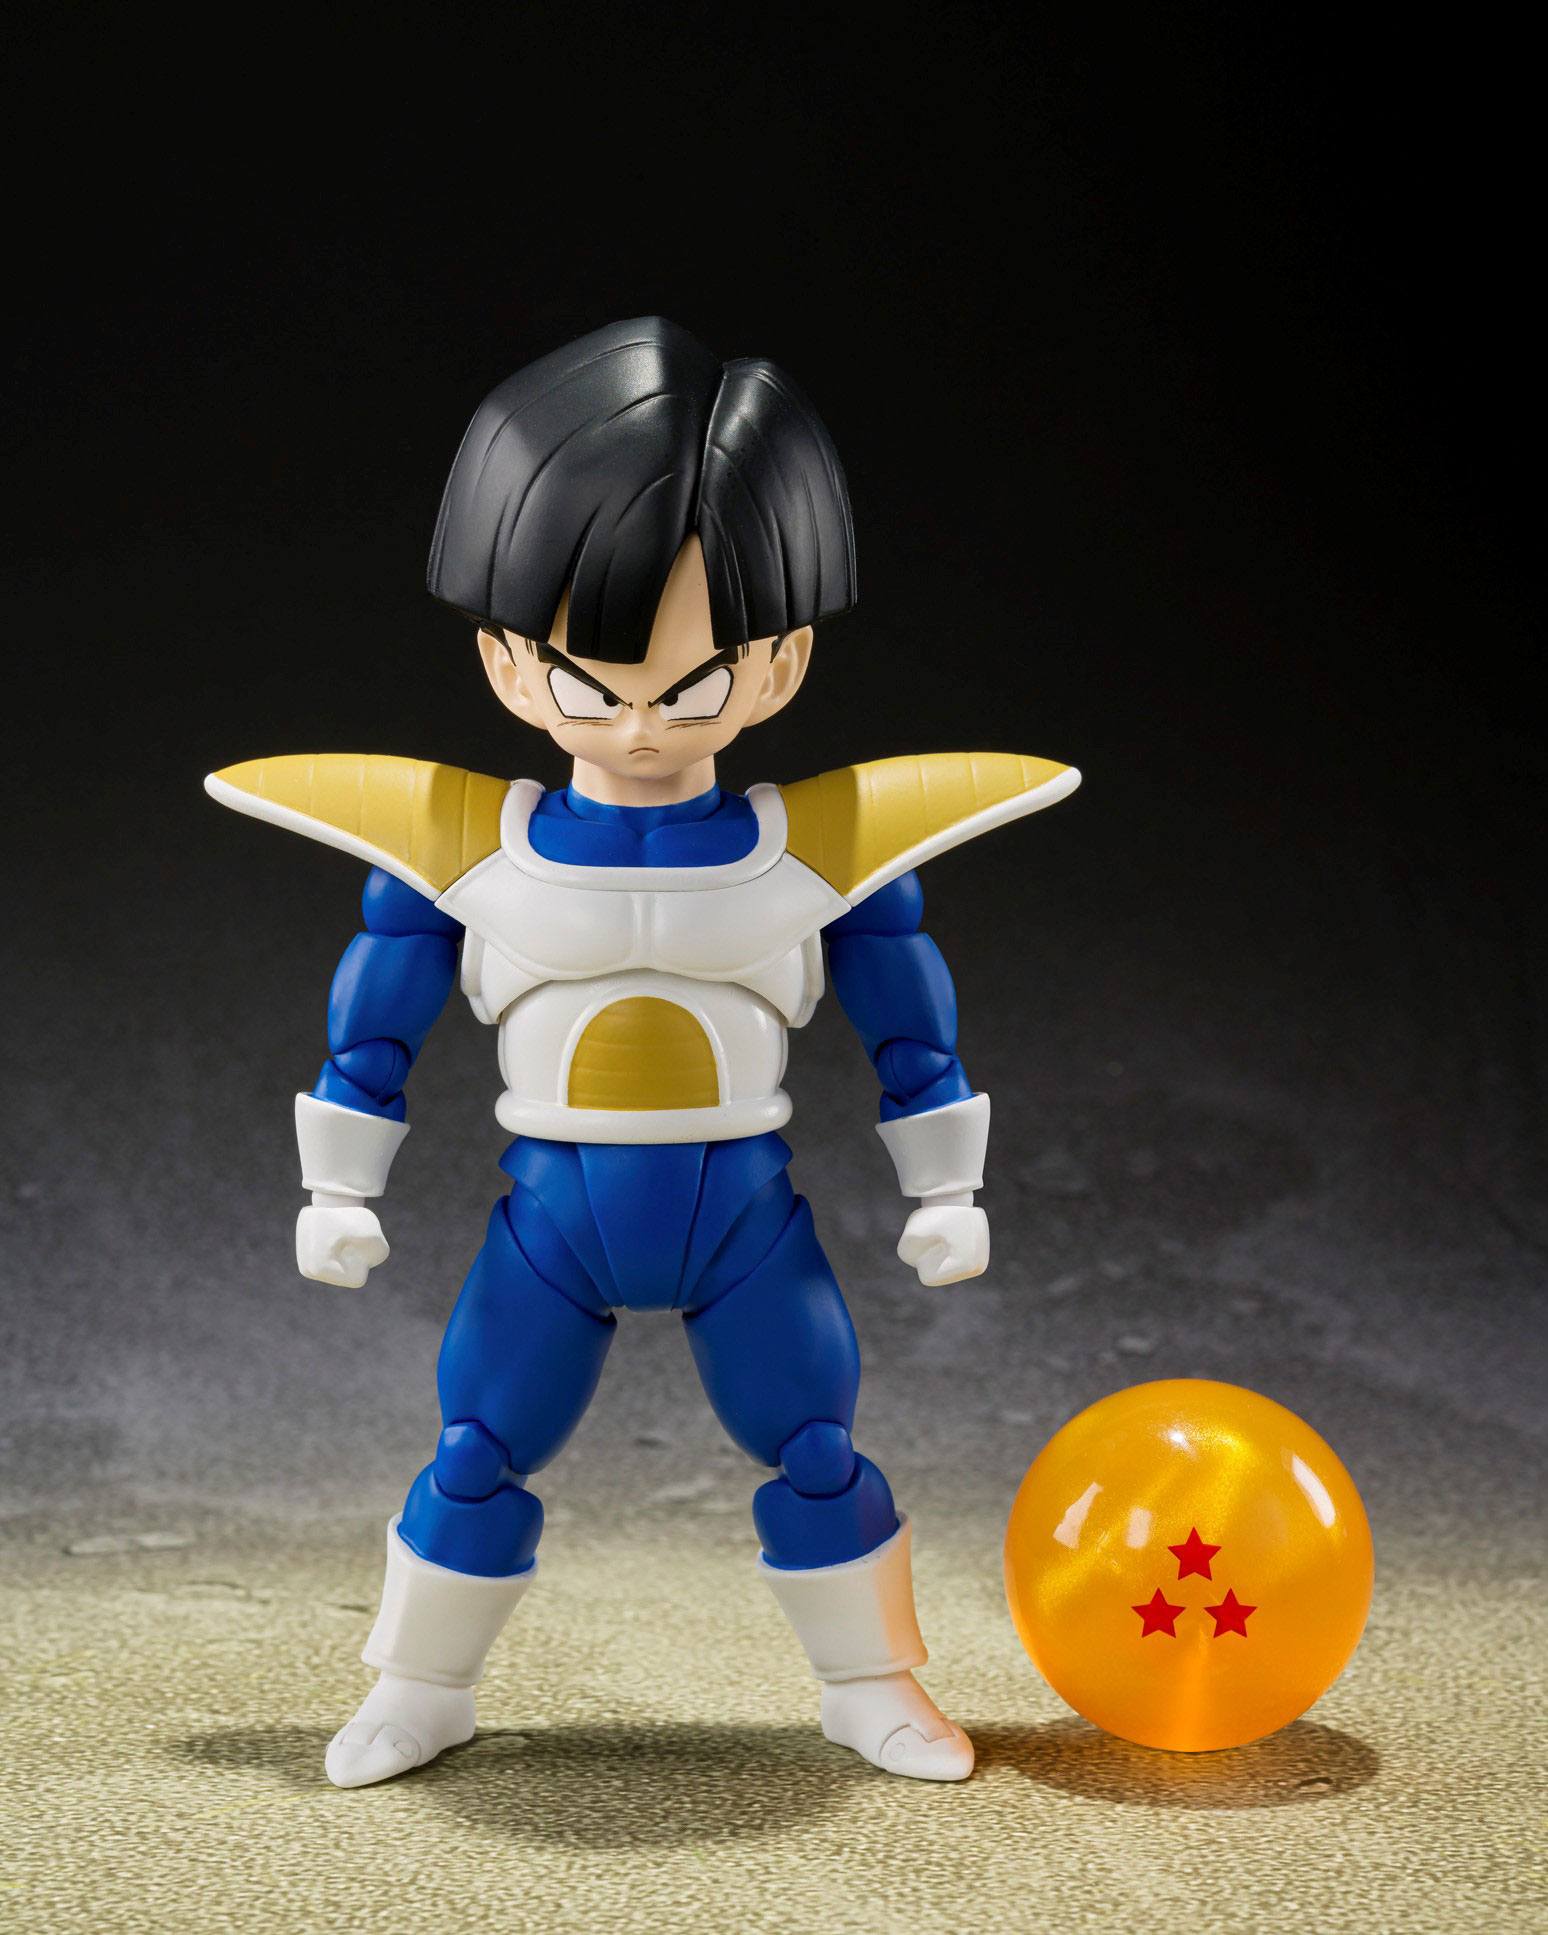 Dragon Ball Z - S.H. Figuarts - Gohan in Battle Clothes.